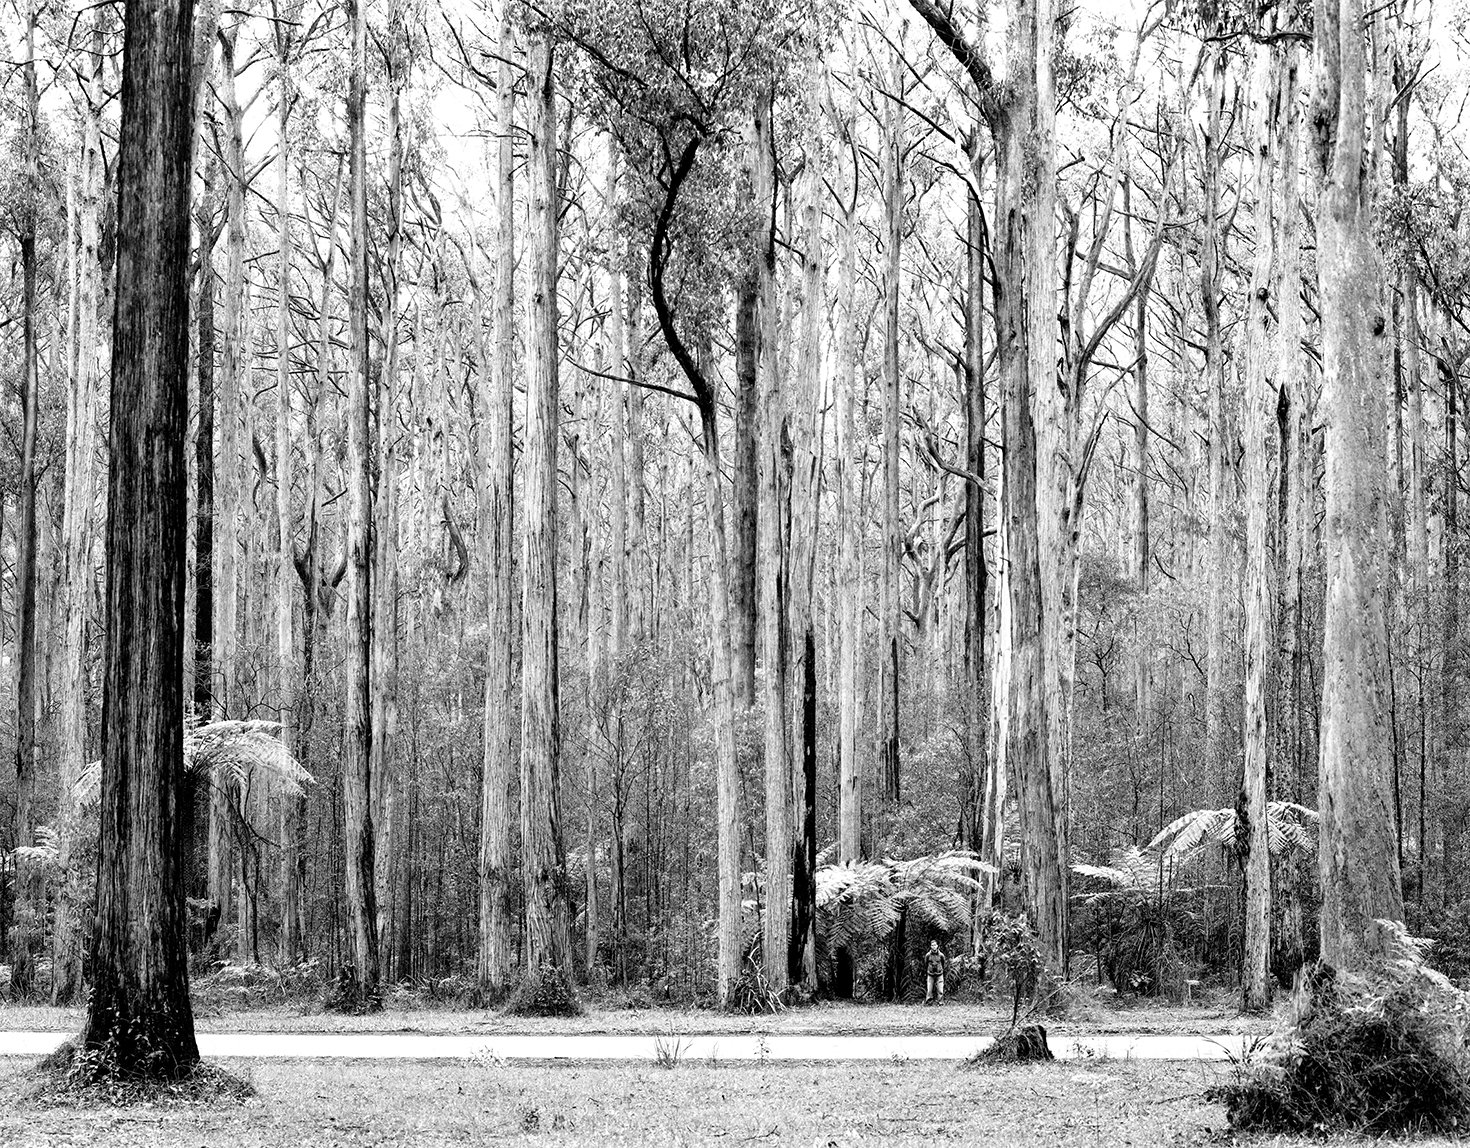    Foundation Photographs  gallery    Patrick Witton   &amp; Mountain Ash  Forest , Toolangi, VIC 2009  Print size variable  